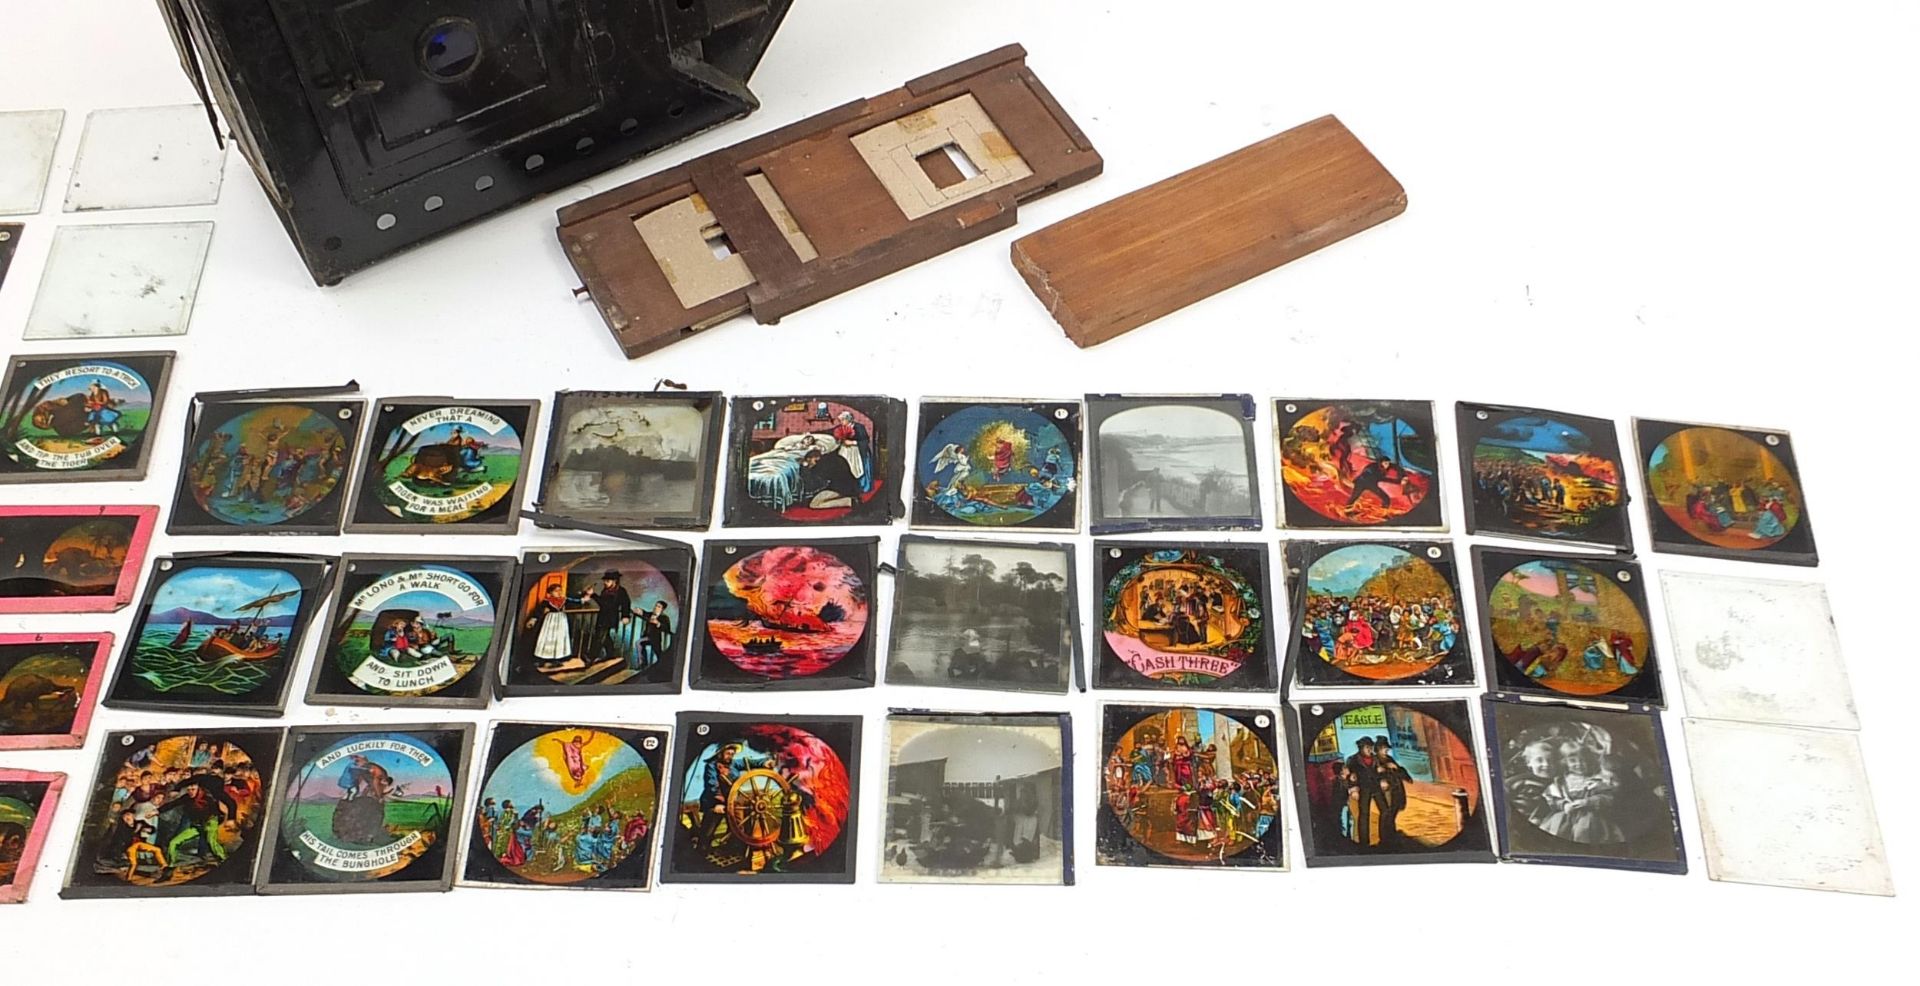 Vintage magic lantern slides with a collection of glass slides, some coloured, the lantern 40cm in - Image 3 of 5